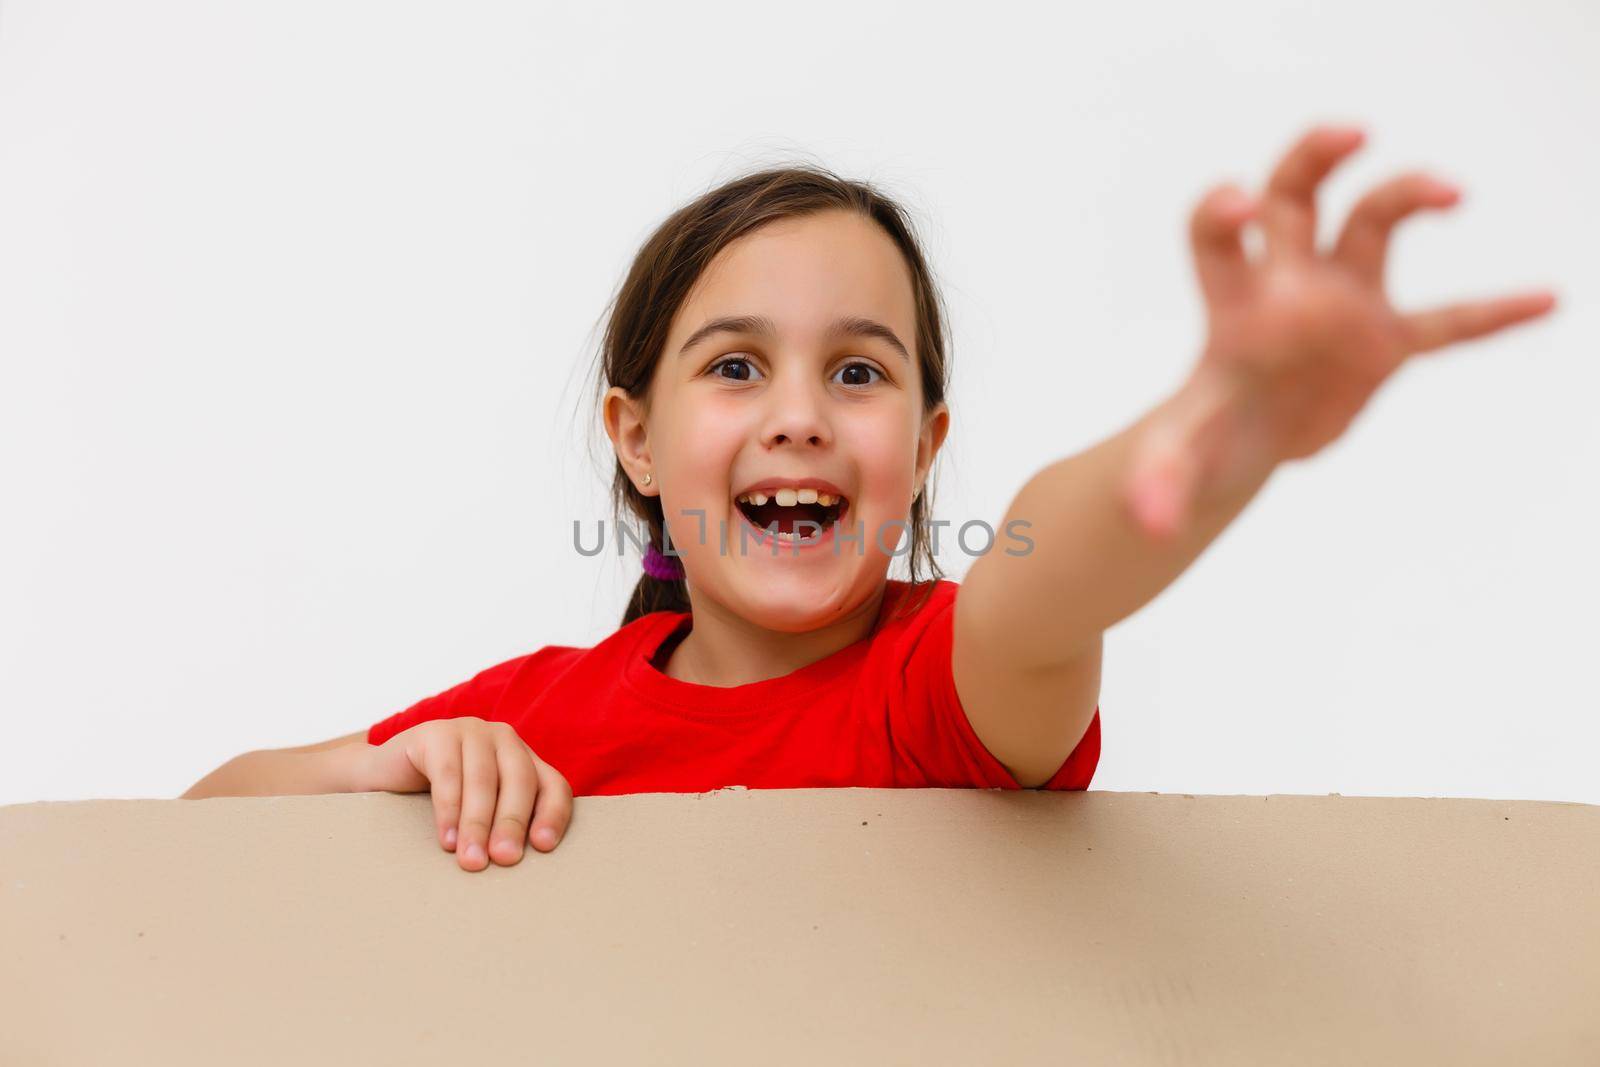 Cute little girl standing in large cardboard box, wanting to play hide-and-seek